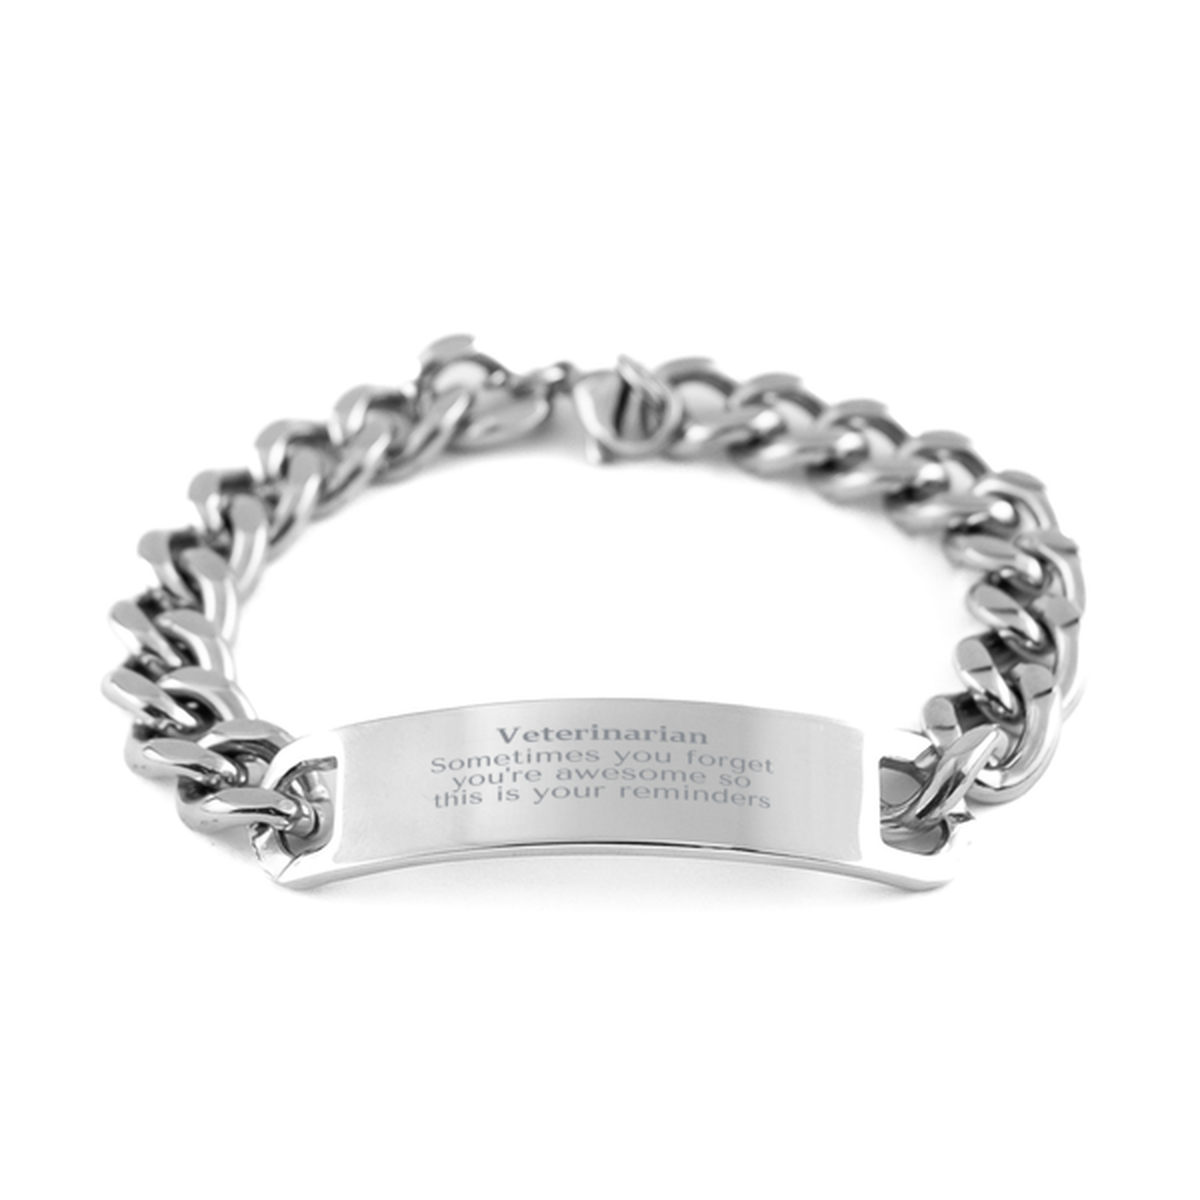 Sentimental Veterinarian Cuban Chain Stainless Steel Bracelet, Veterinarian Sometimes you forget you're awesome so this is your reminders, Graduation Christmas Birthday Gifts for Veterinarian, Men, Women, Coworkers